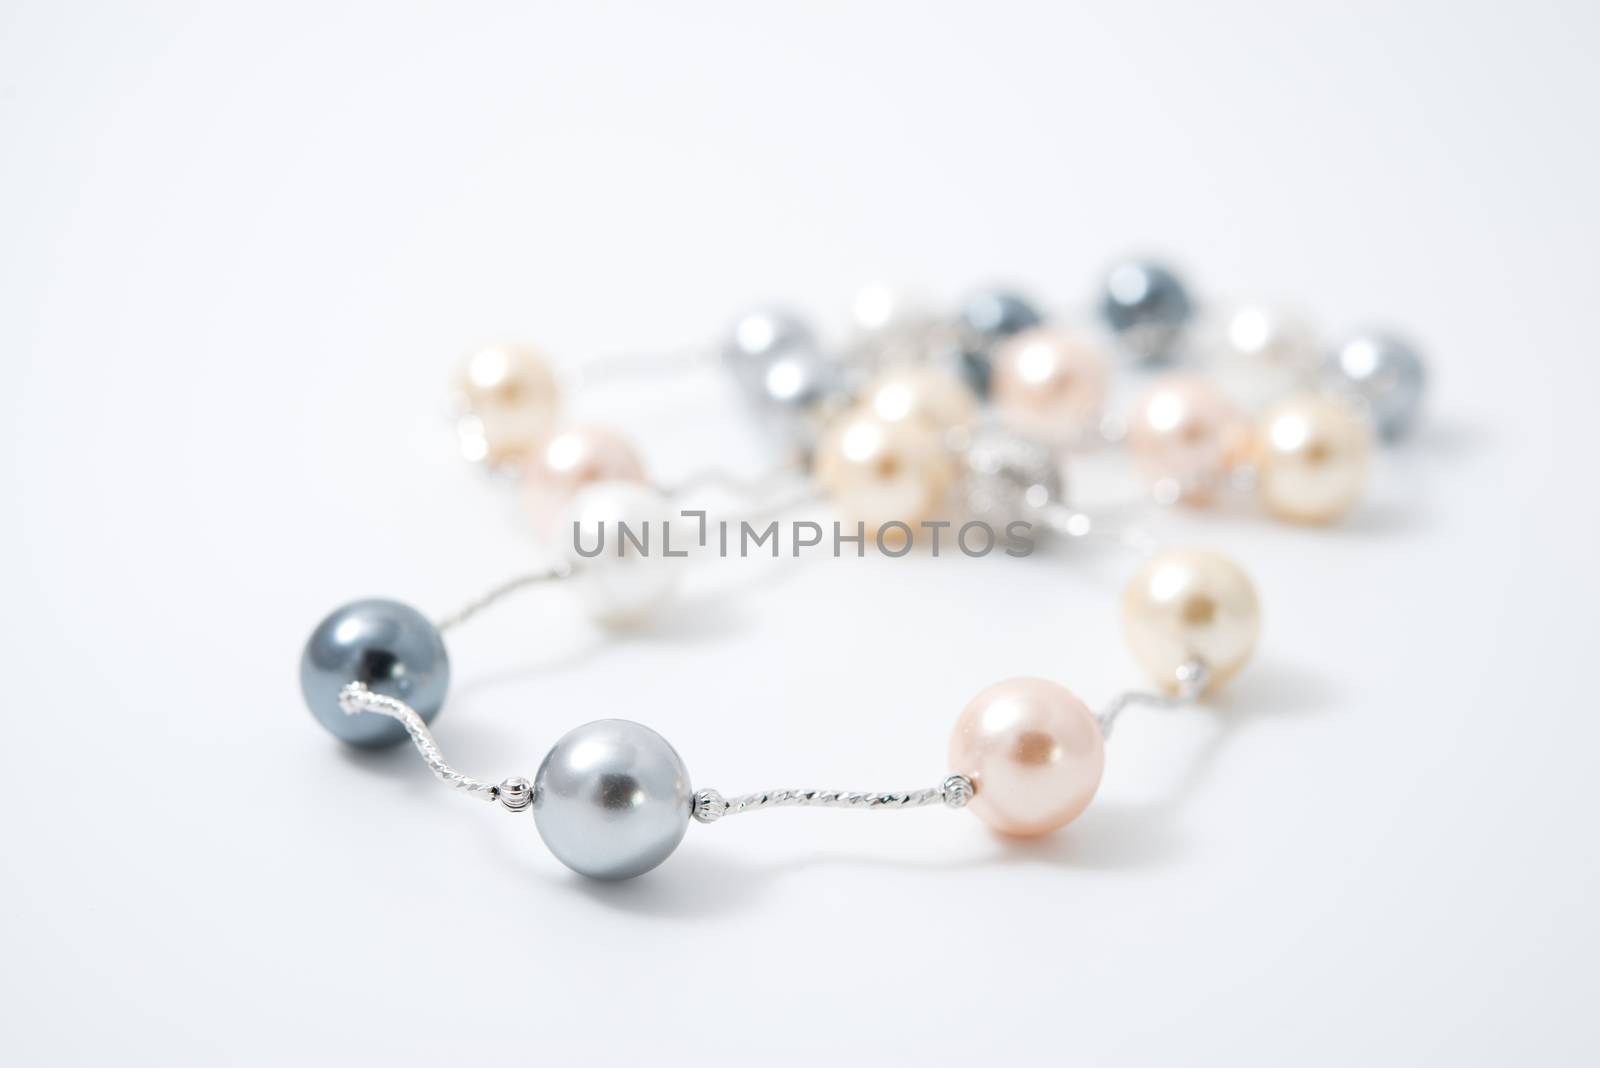 pearl necklace on white background by antpkr